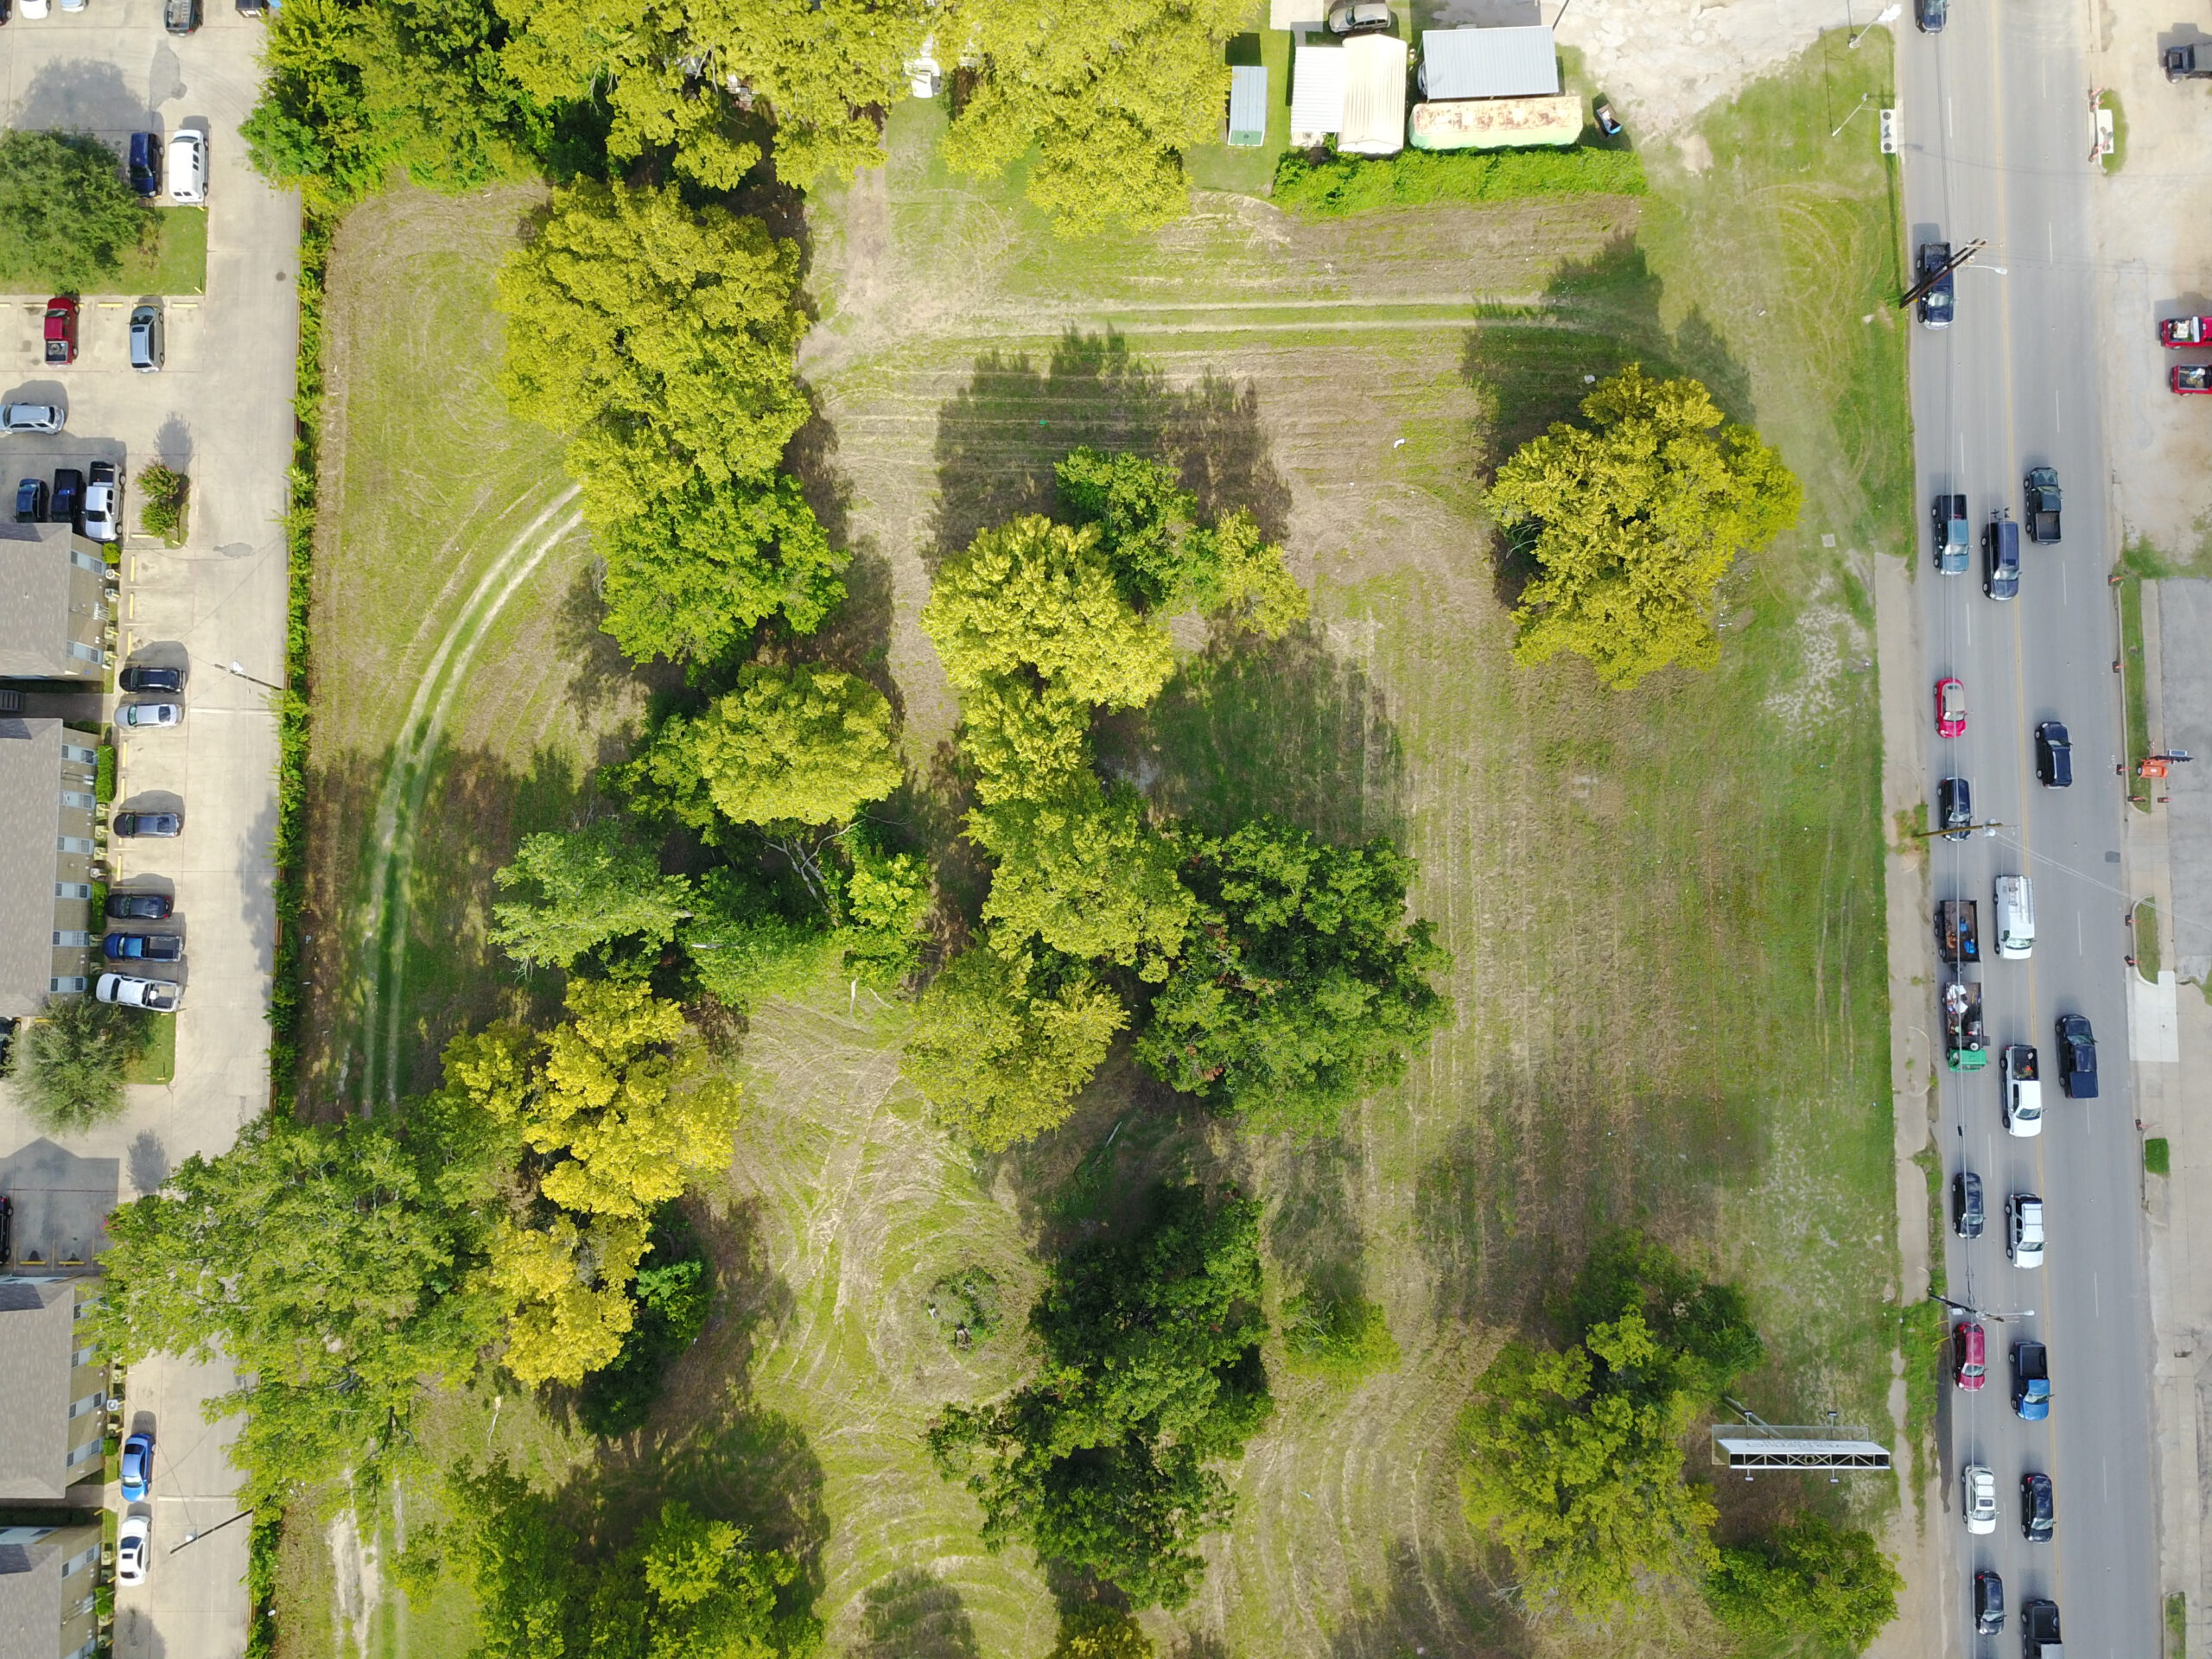 Birds-eye view of a grassy plot of land with trees adjacent to a parking lot on one side and a street on the other